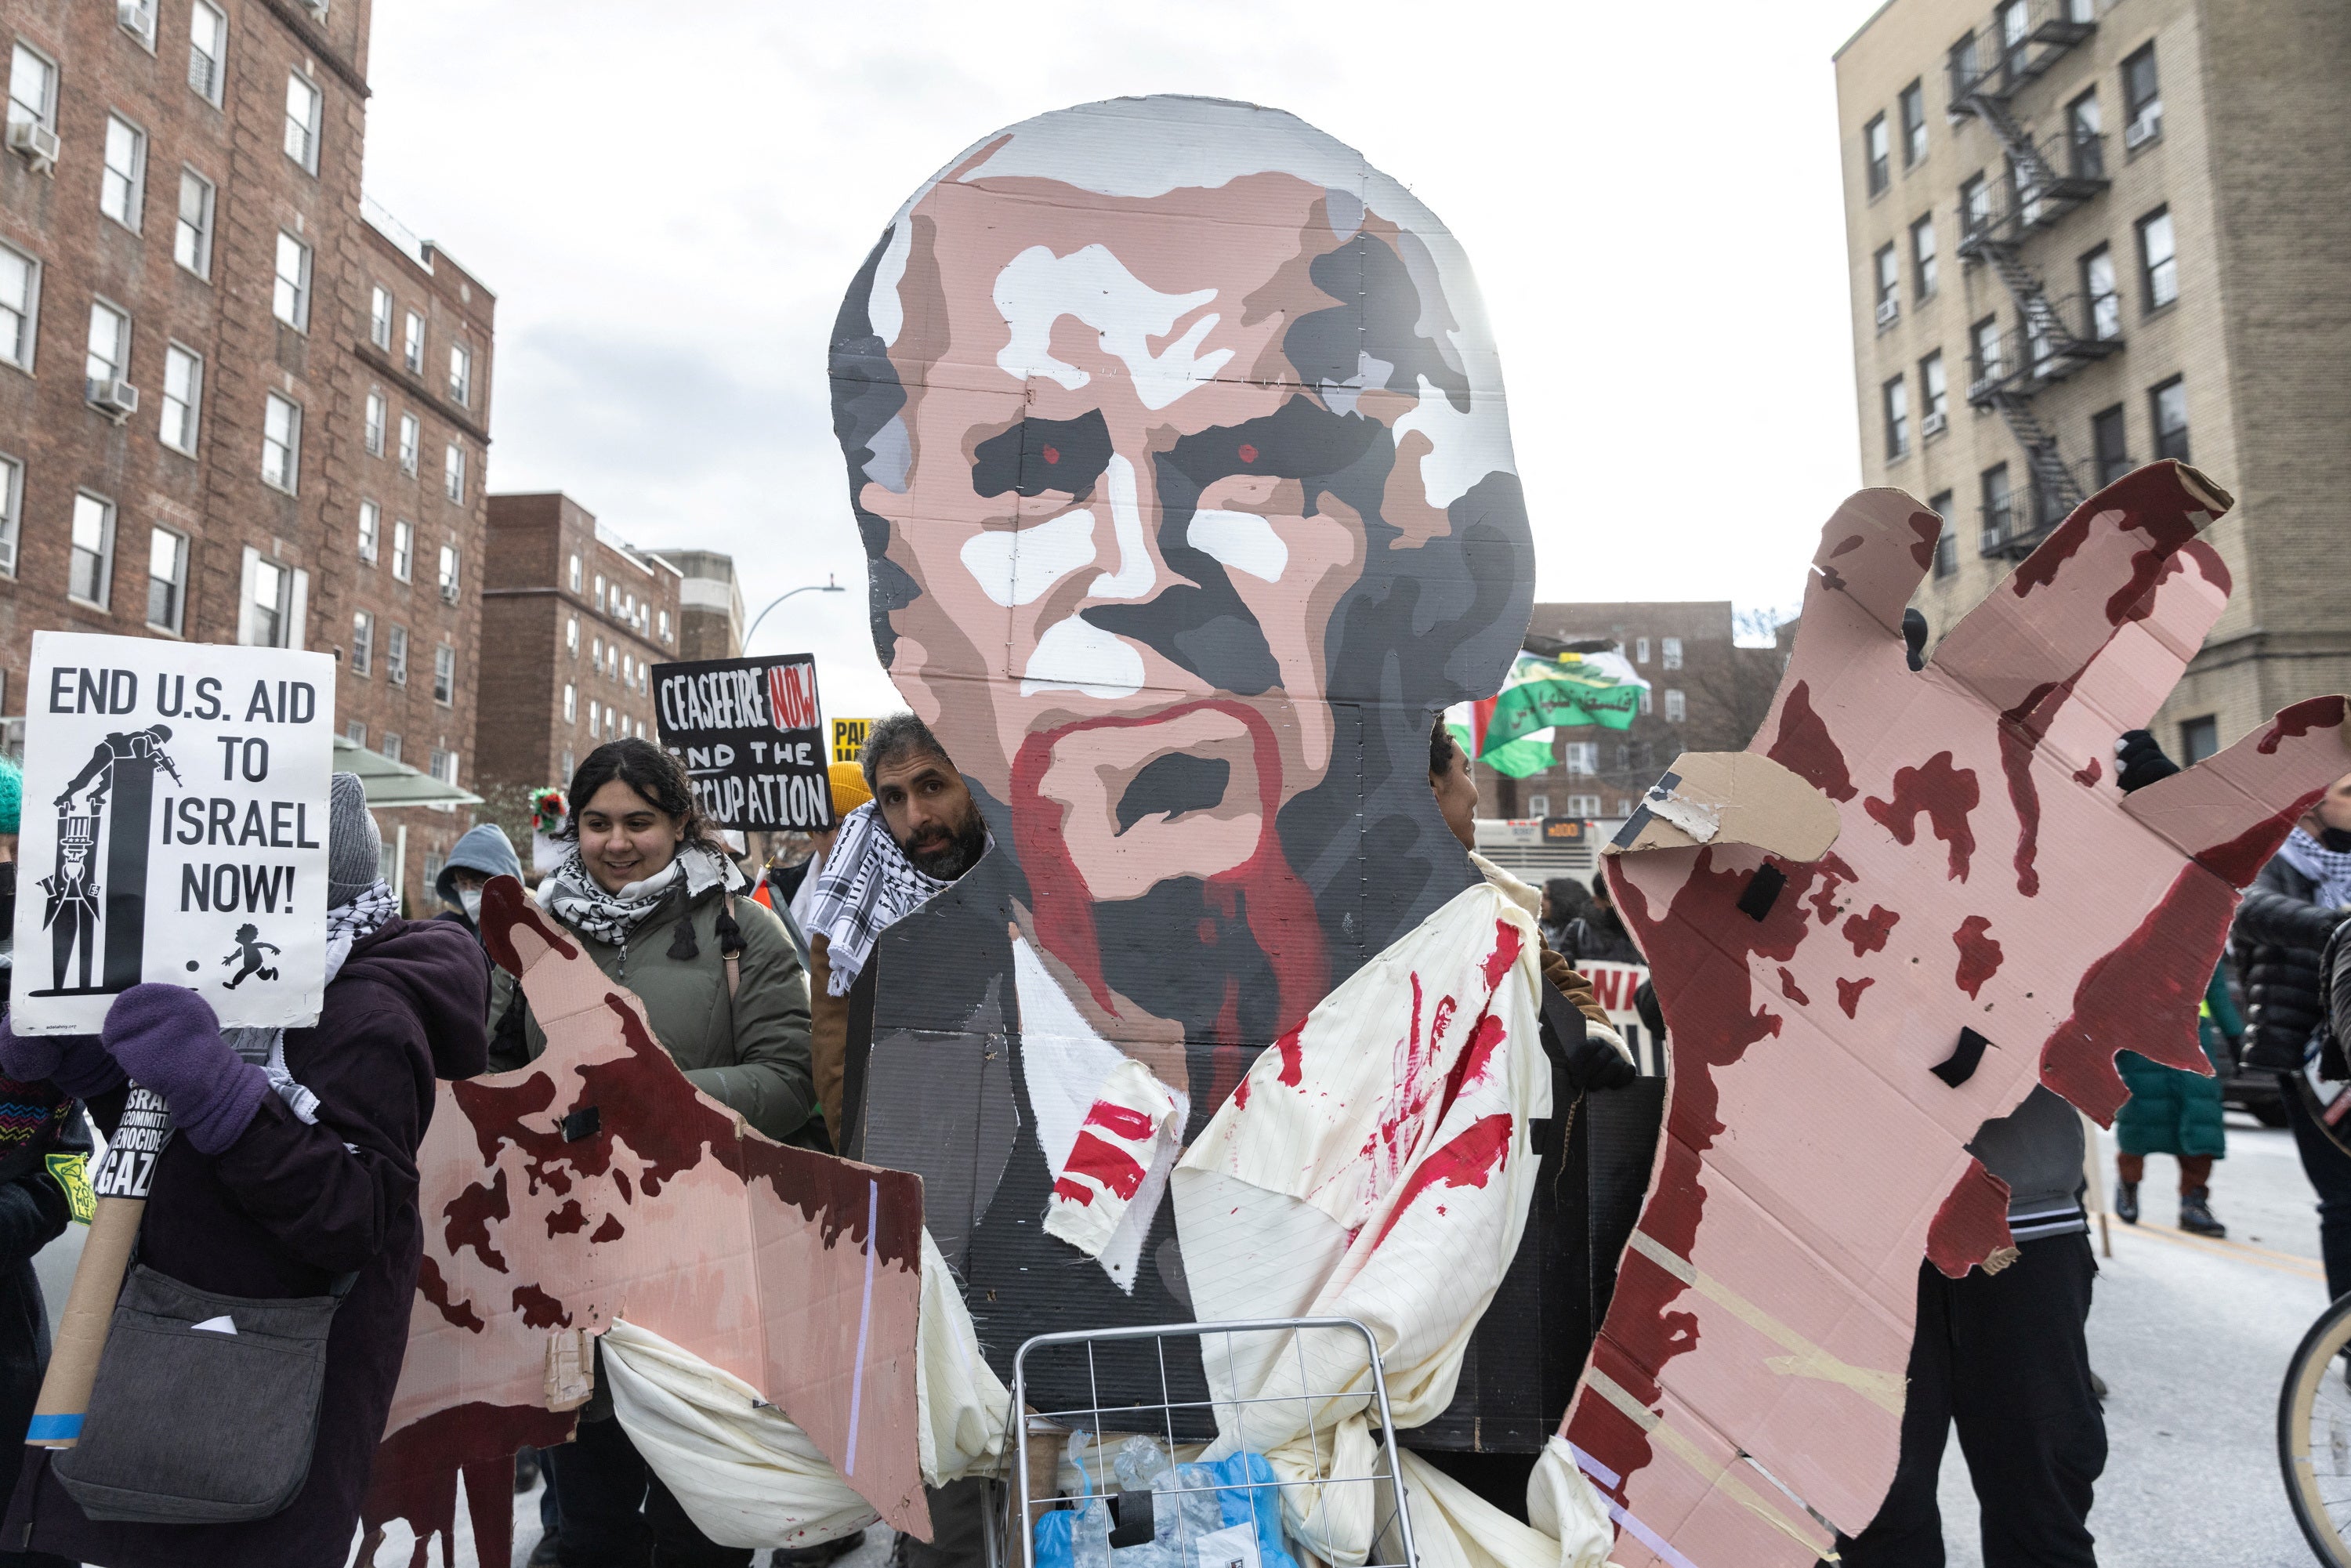 Demonstrators take part in the ‘Biden: stop supporting genocide!" rally in New York City on 20 January